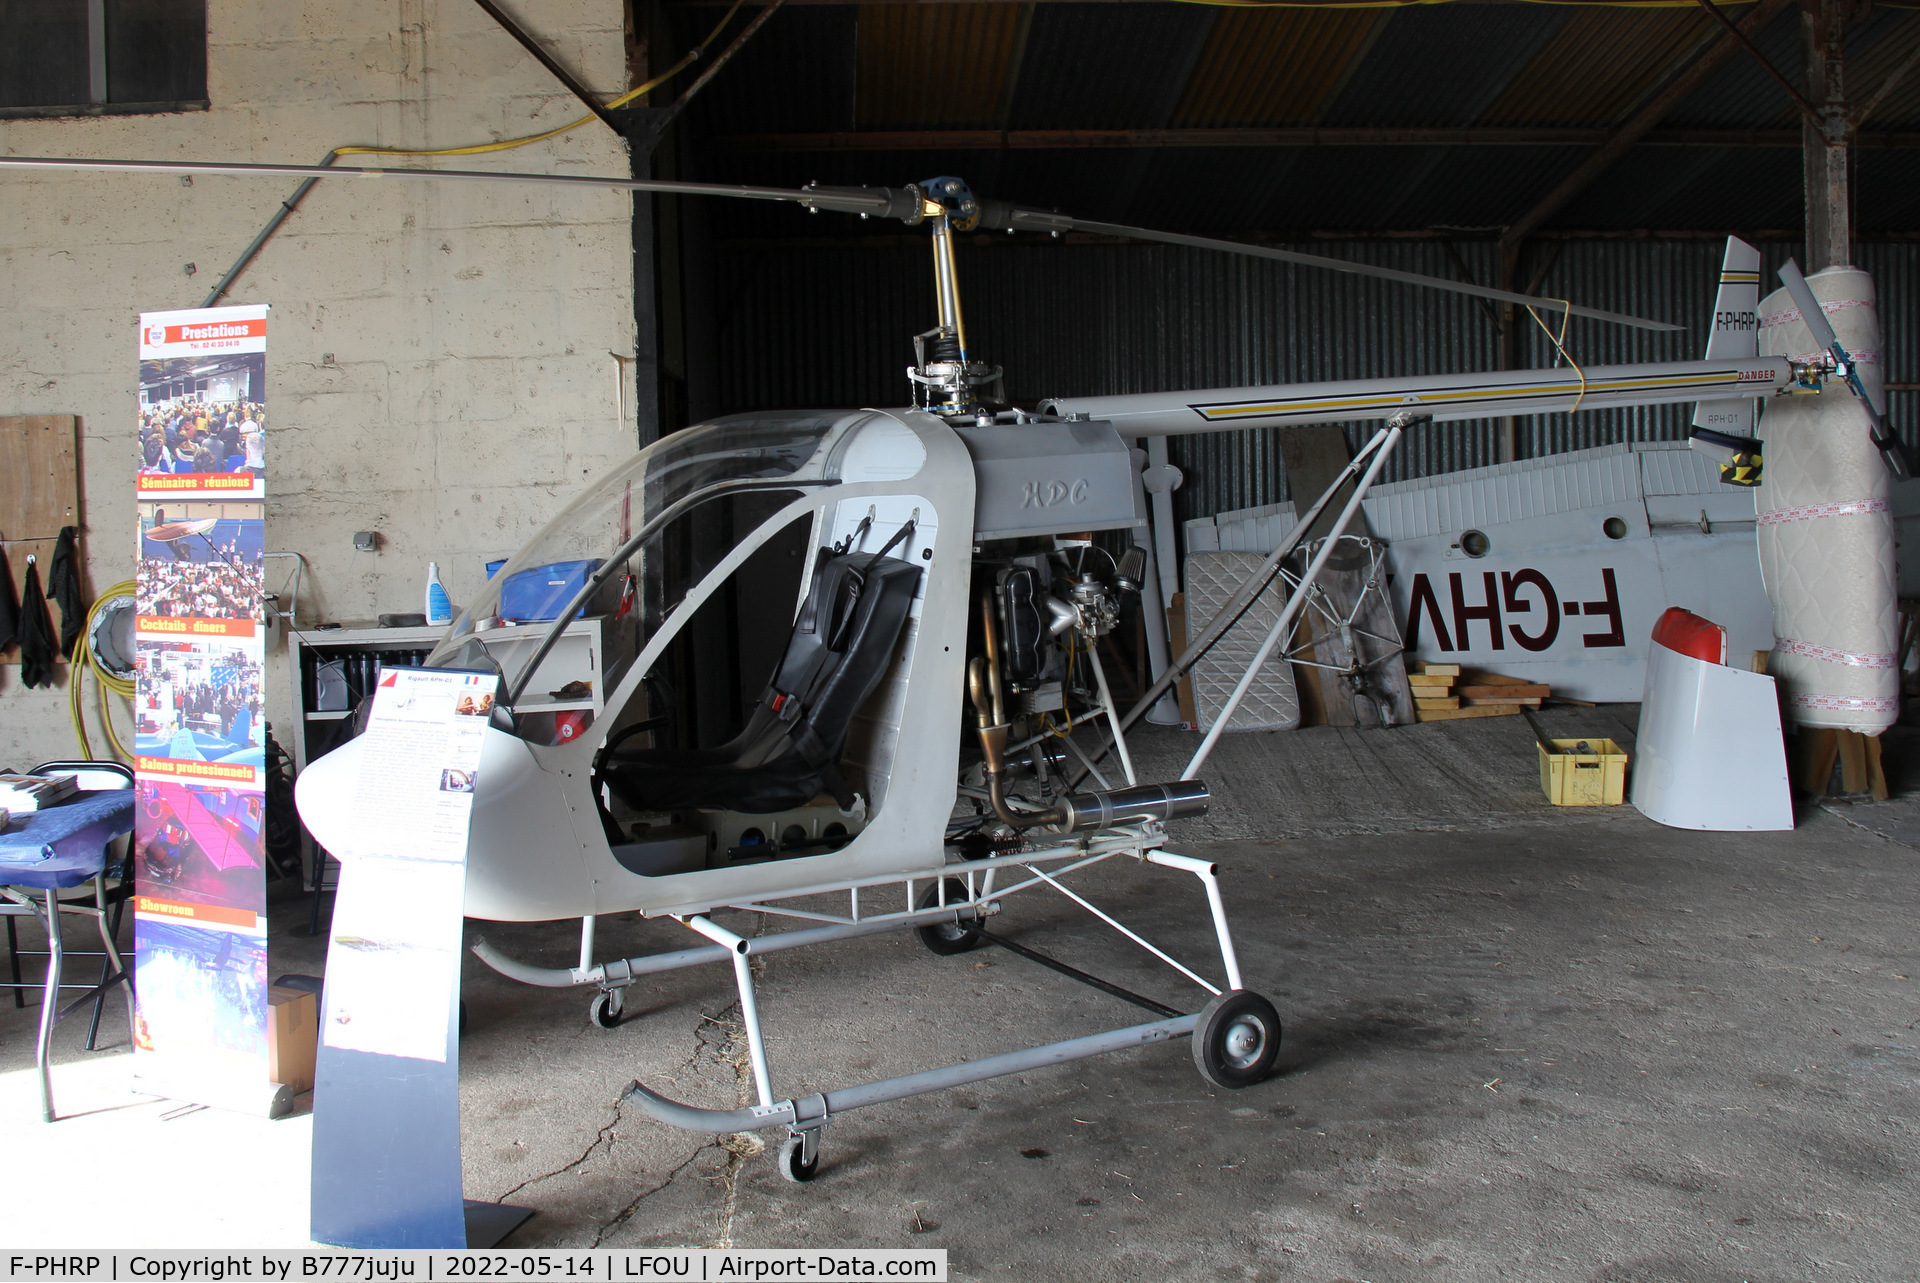 F-PHRP, Paul Rigault RPH01 C/N 01, at Helico 2022 Cholet